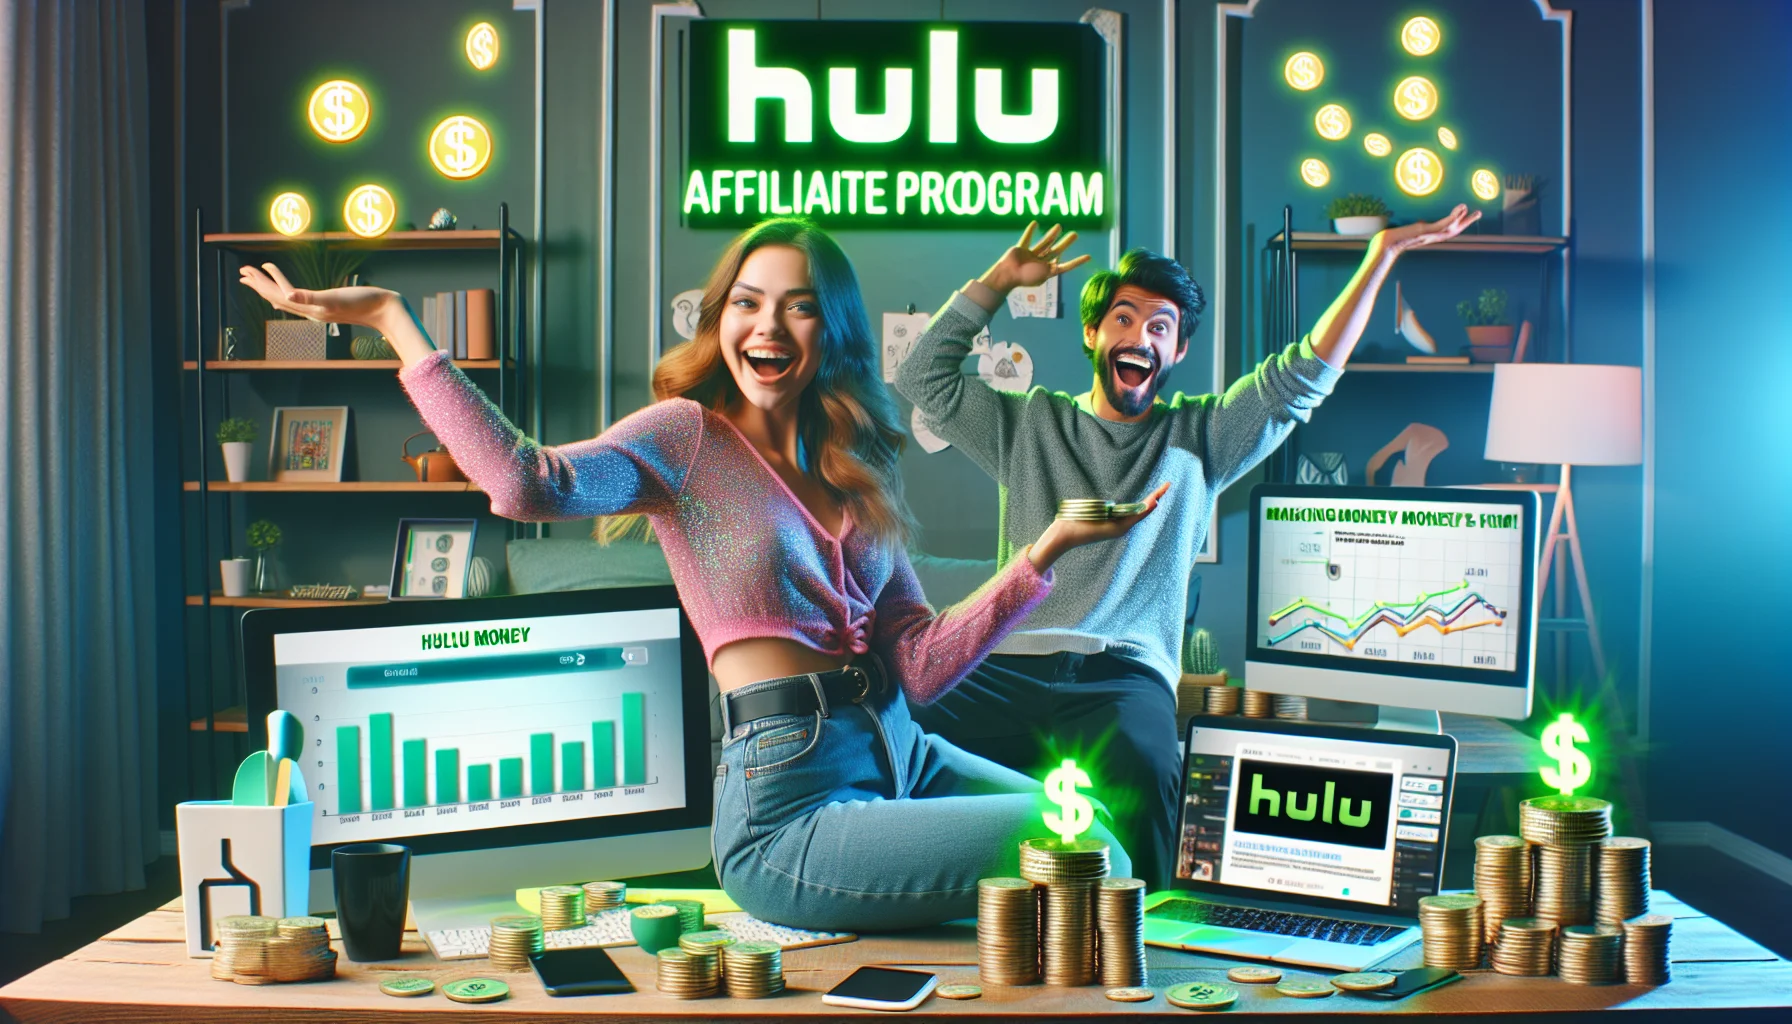 A captivating and humorous scene related to making digital money online. In the foreground, a young Caucasian woman is sitting on a stack of virtual coins at her computer desk, while a Hispanic man in the background is cheerfully juggling digital money icons. They're in a stylish yet quirky home office with a glowing 'Hulu Affiliate Program' neon sign hanging on the wall behind them. The variety of digital devices open on the table display graphics signifying increasing profits and streaming viewership. The overall mood is upbeat, suggesting making money through the program is fun and achievable.